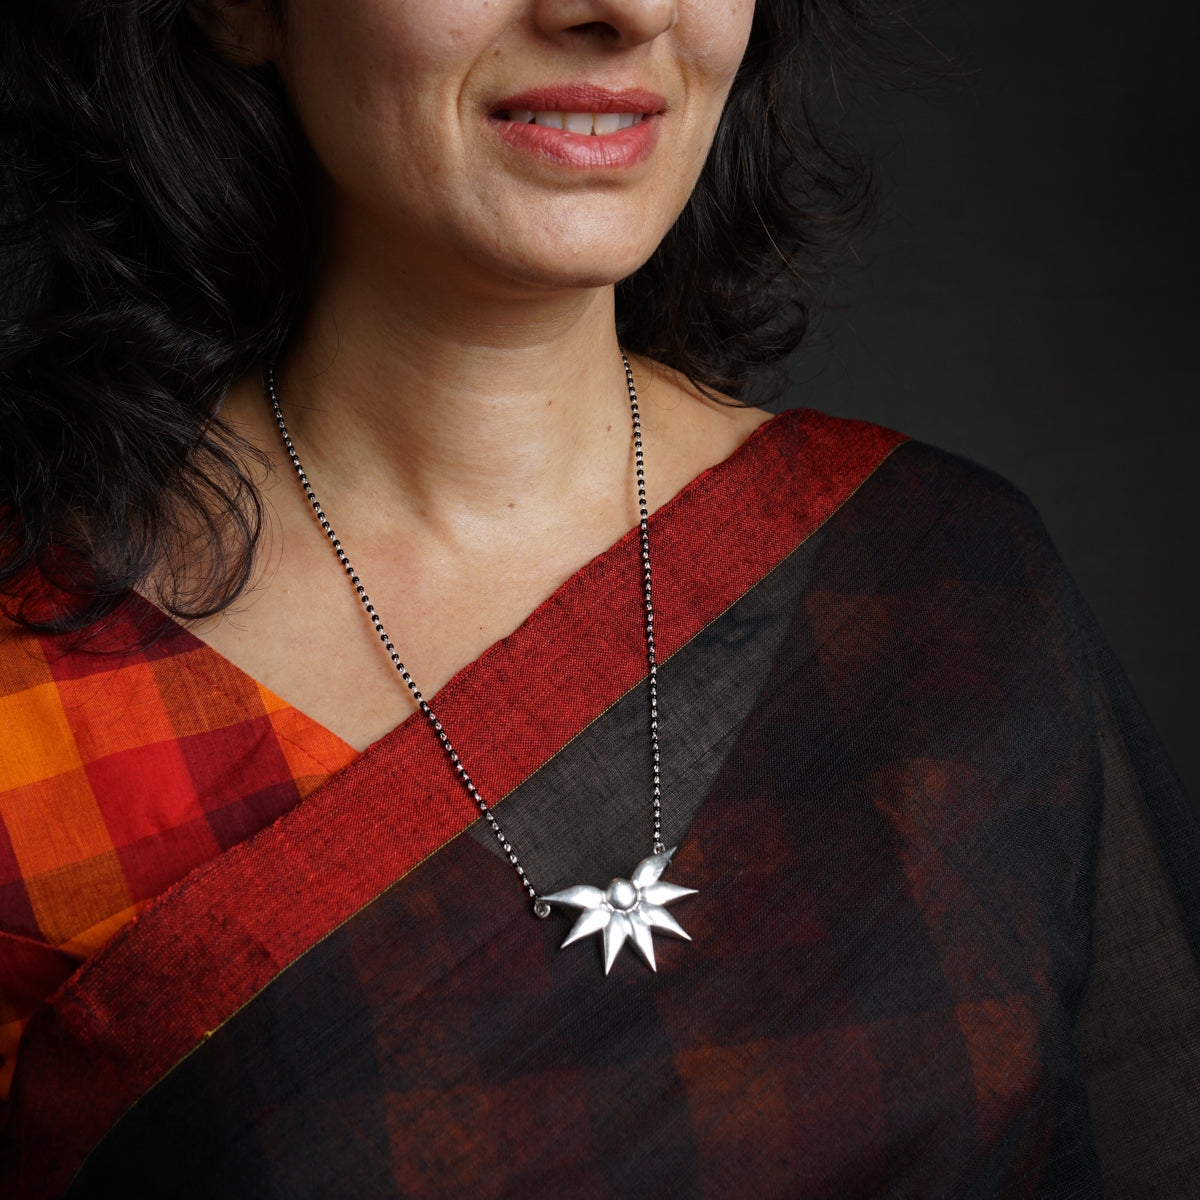 a woman wearing a necklace with a star on it